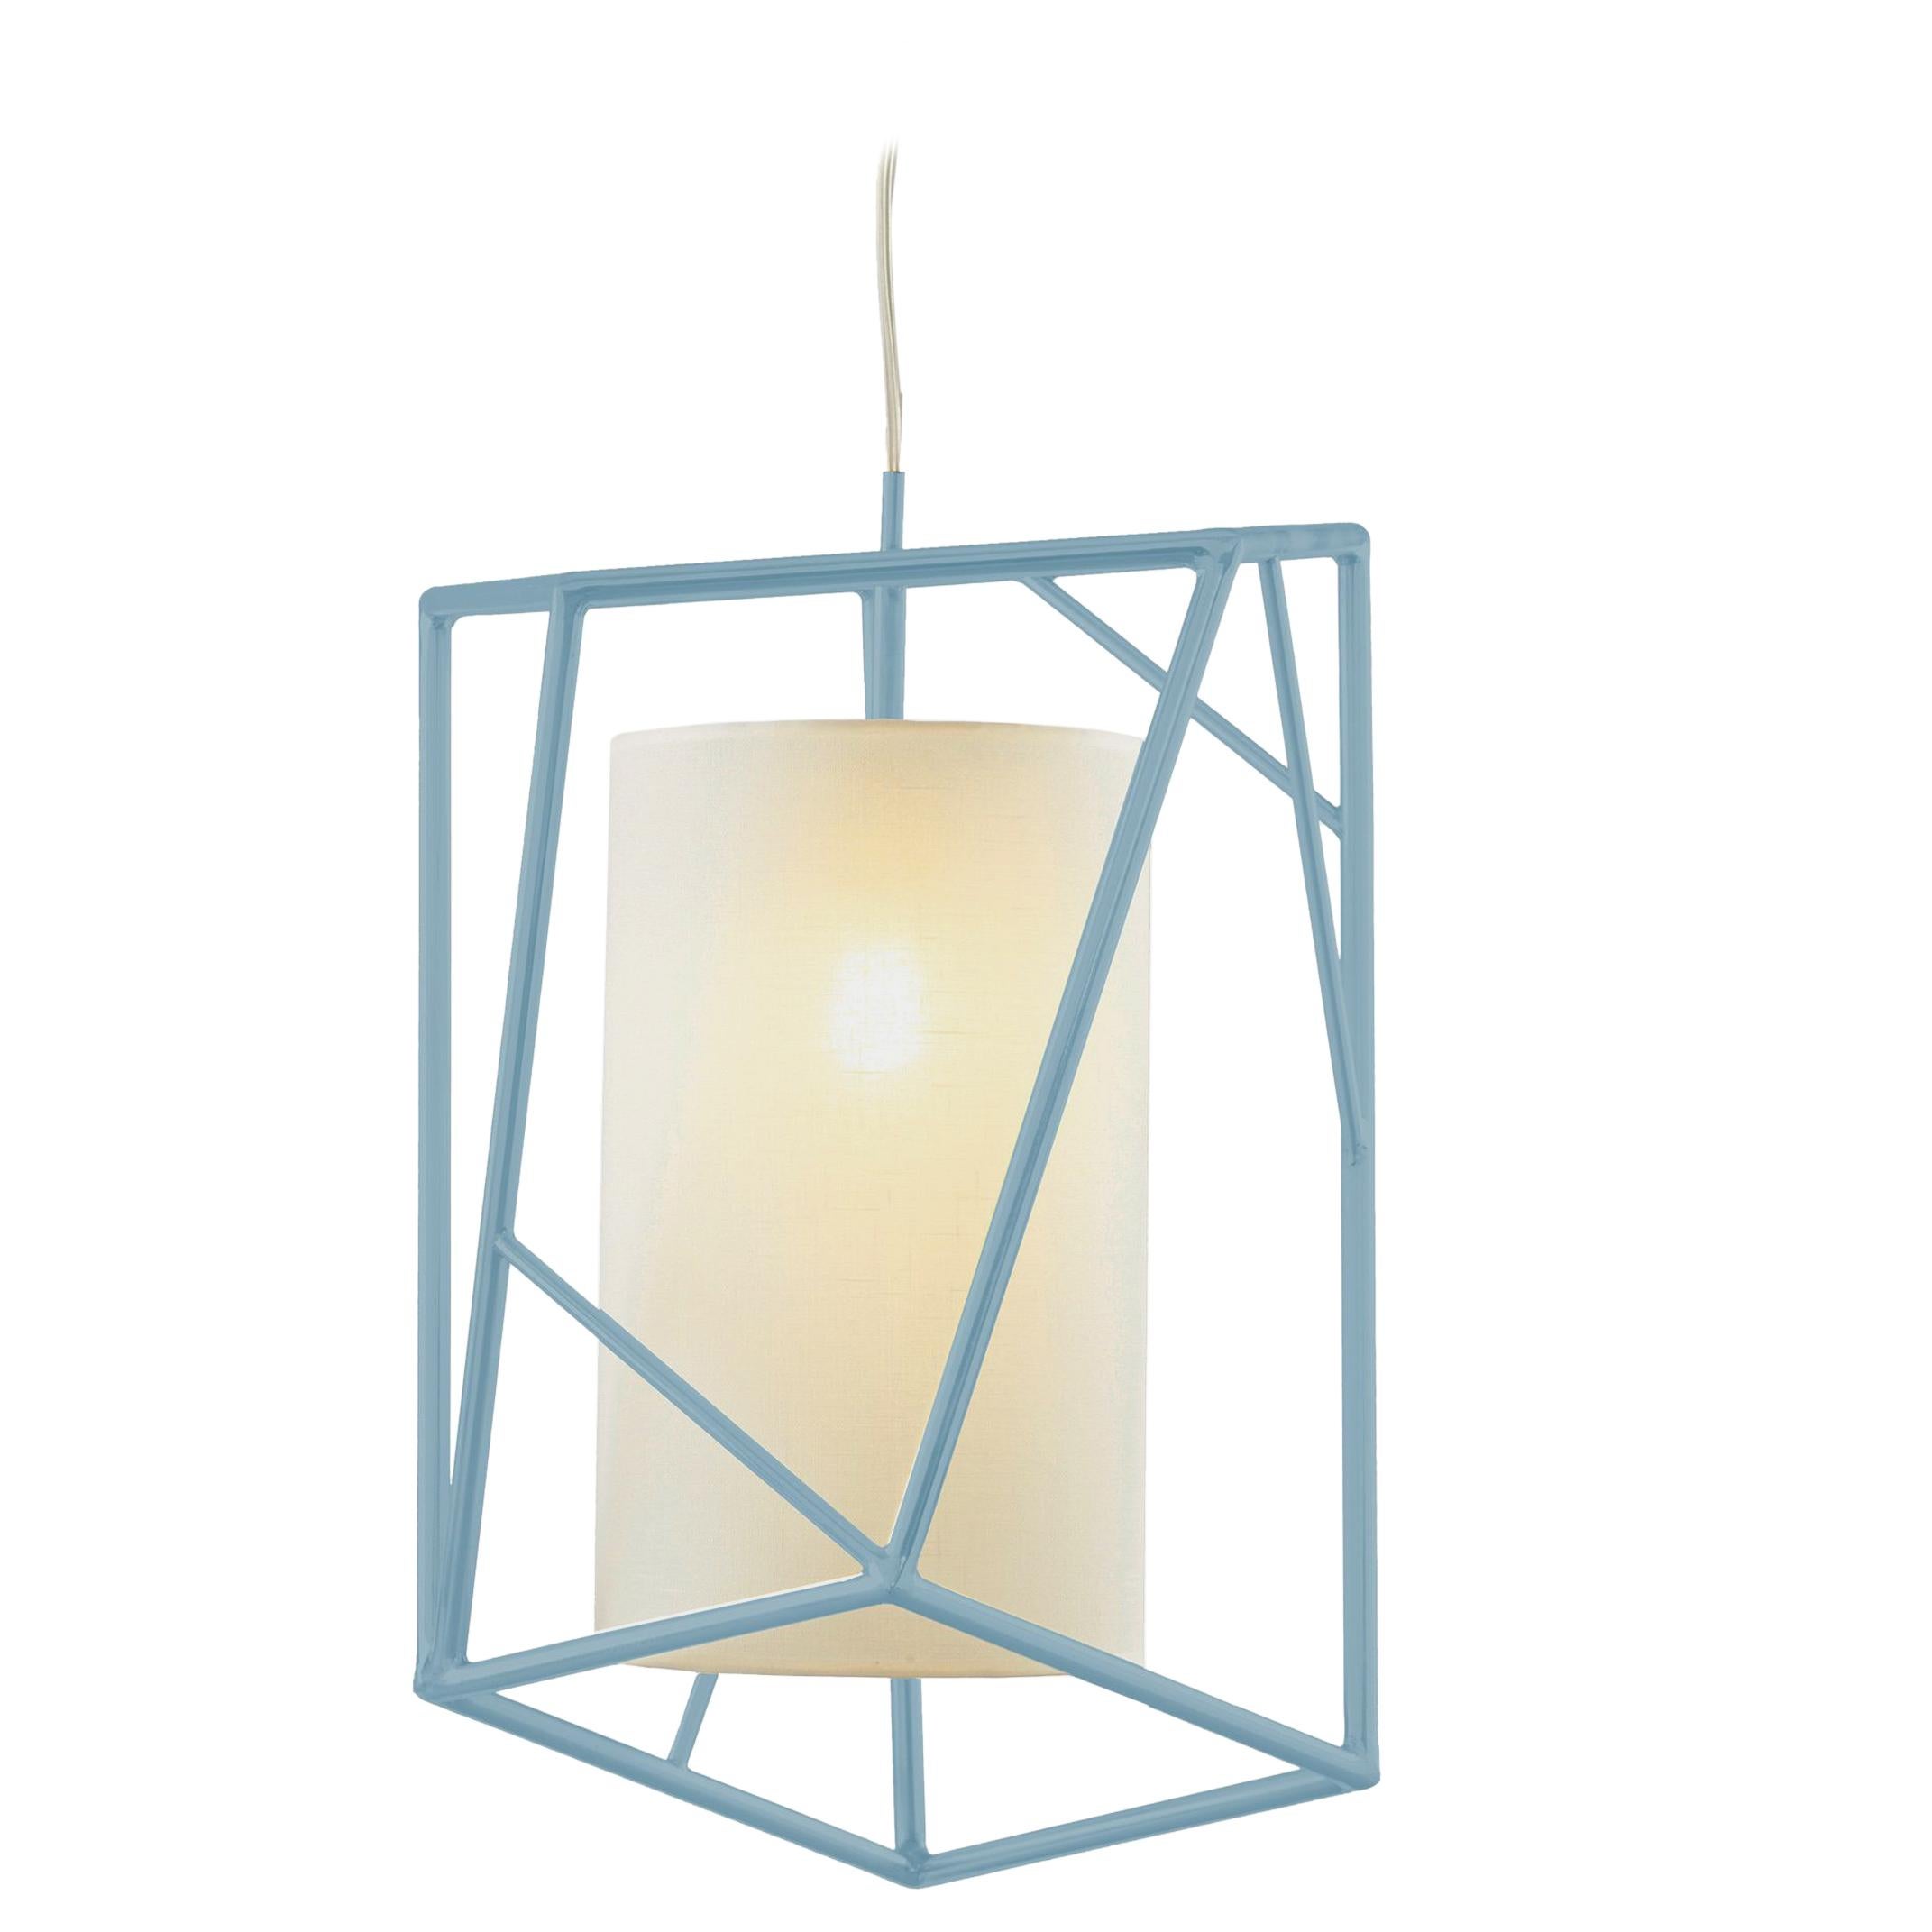 Art Deco Inspired Star III Pendant Lamp Mint Green and Linen Shade